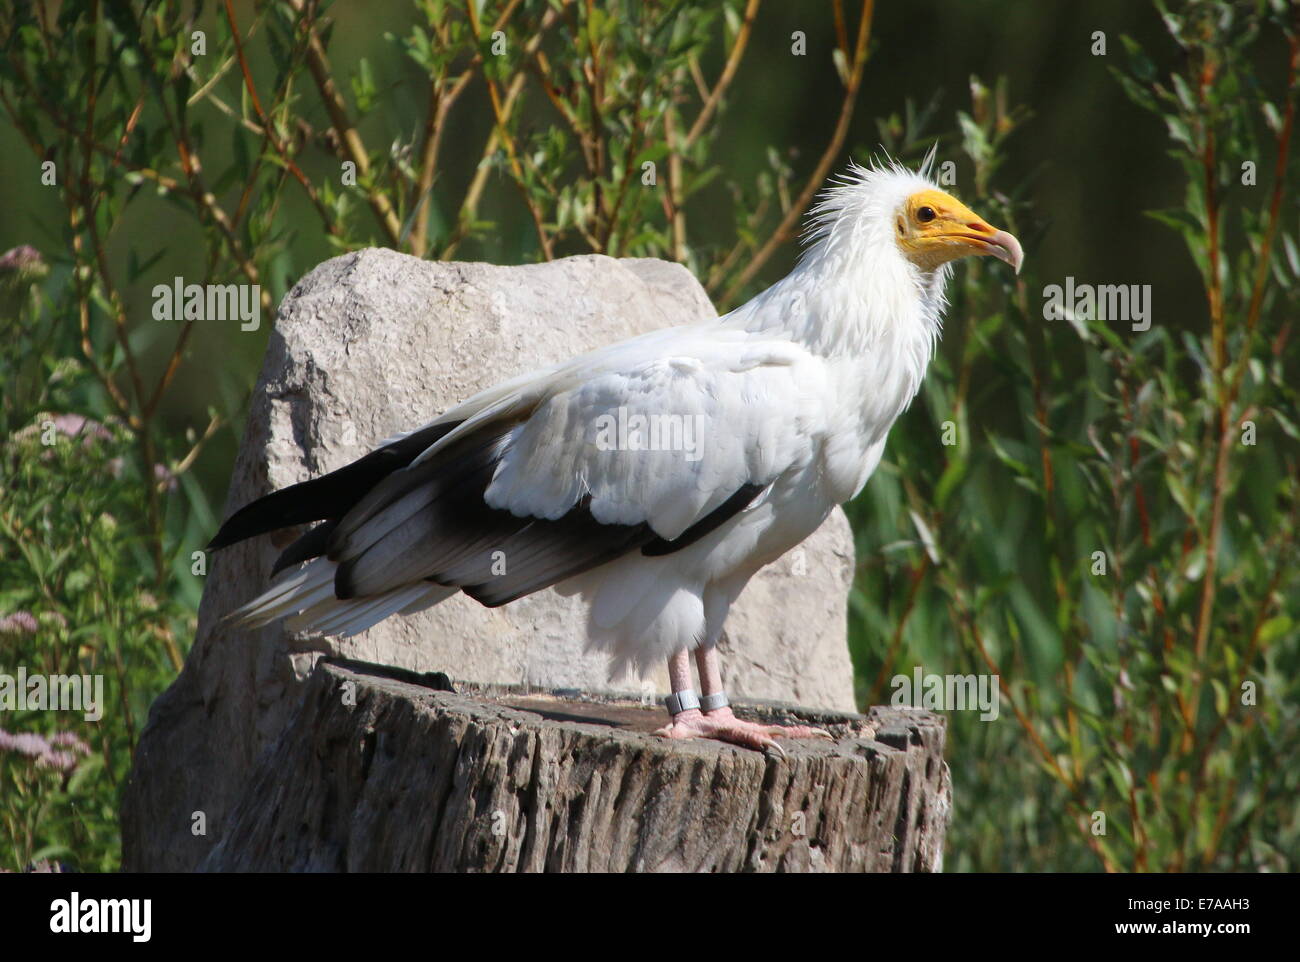 Egyptian vulture or white scavenger vulture (Neophron percnopterus) Stock Photo